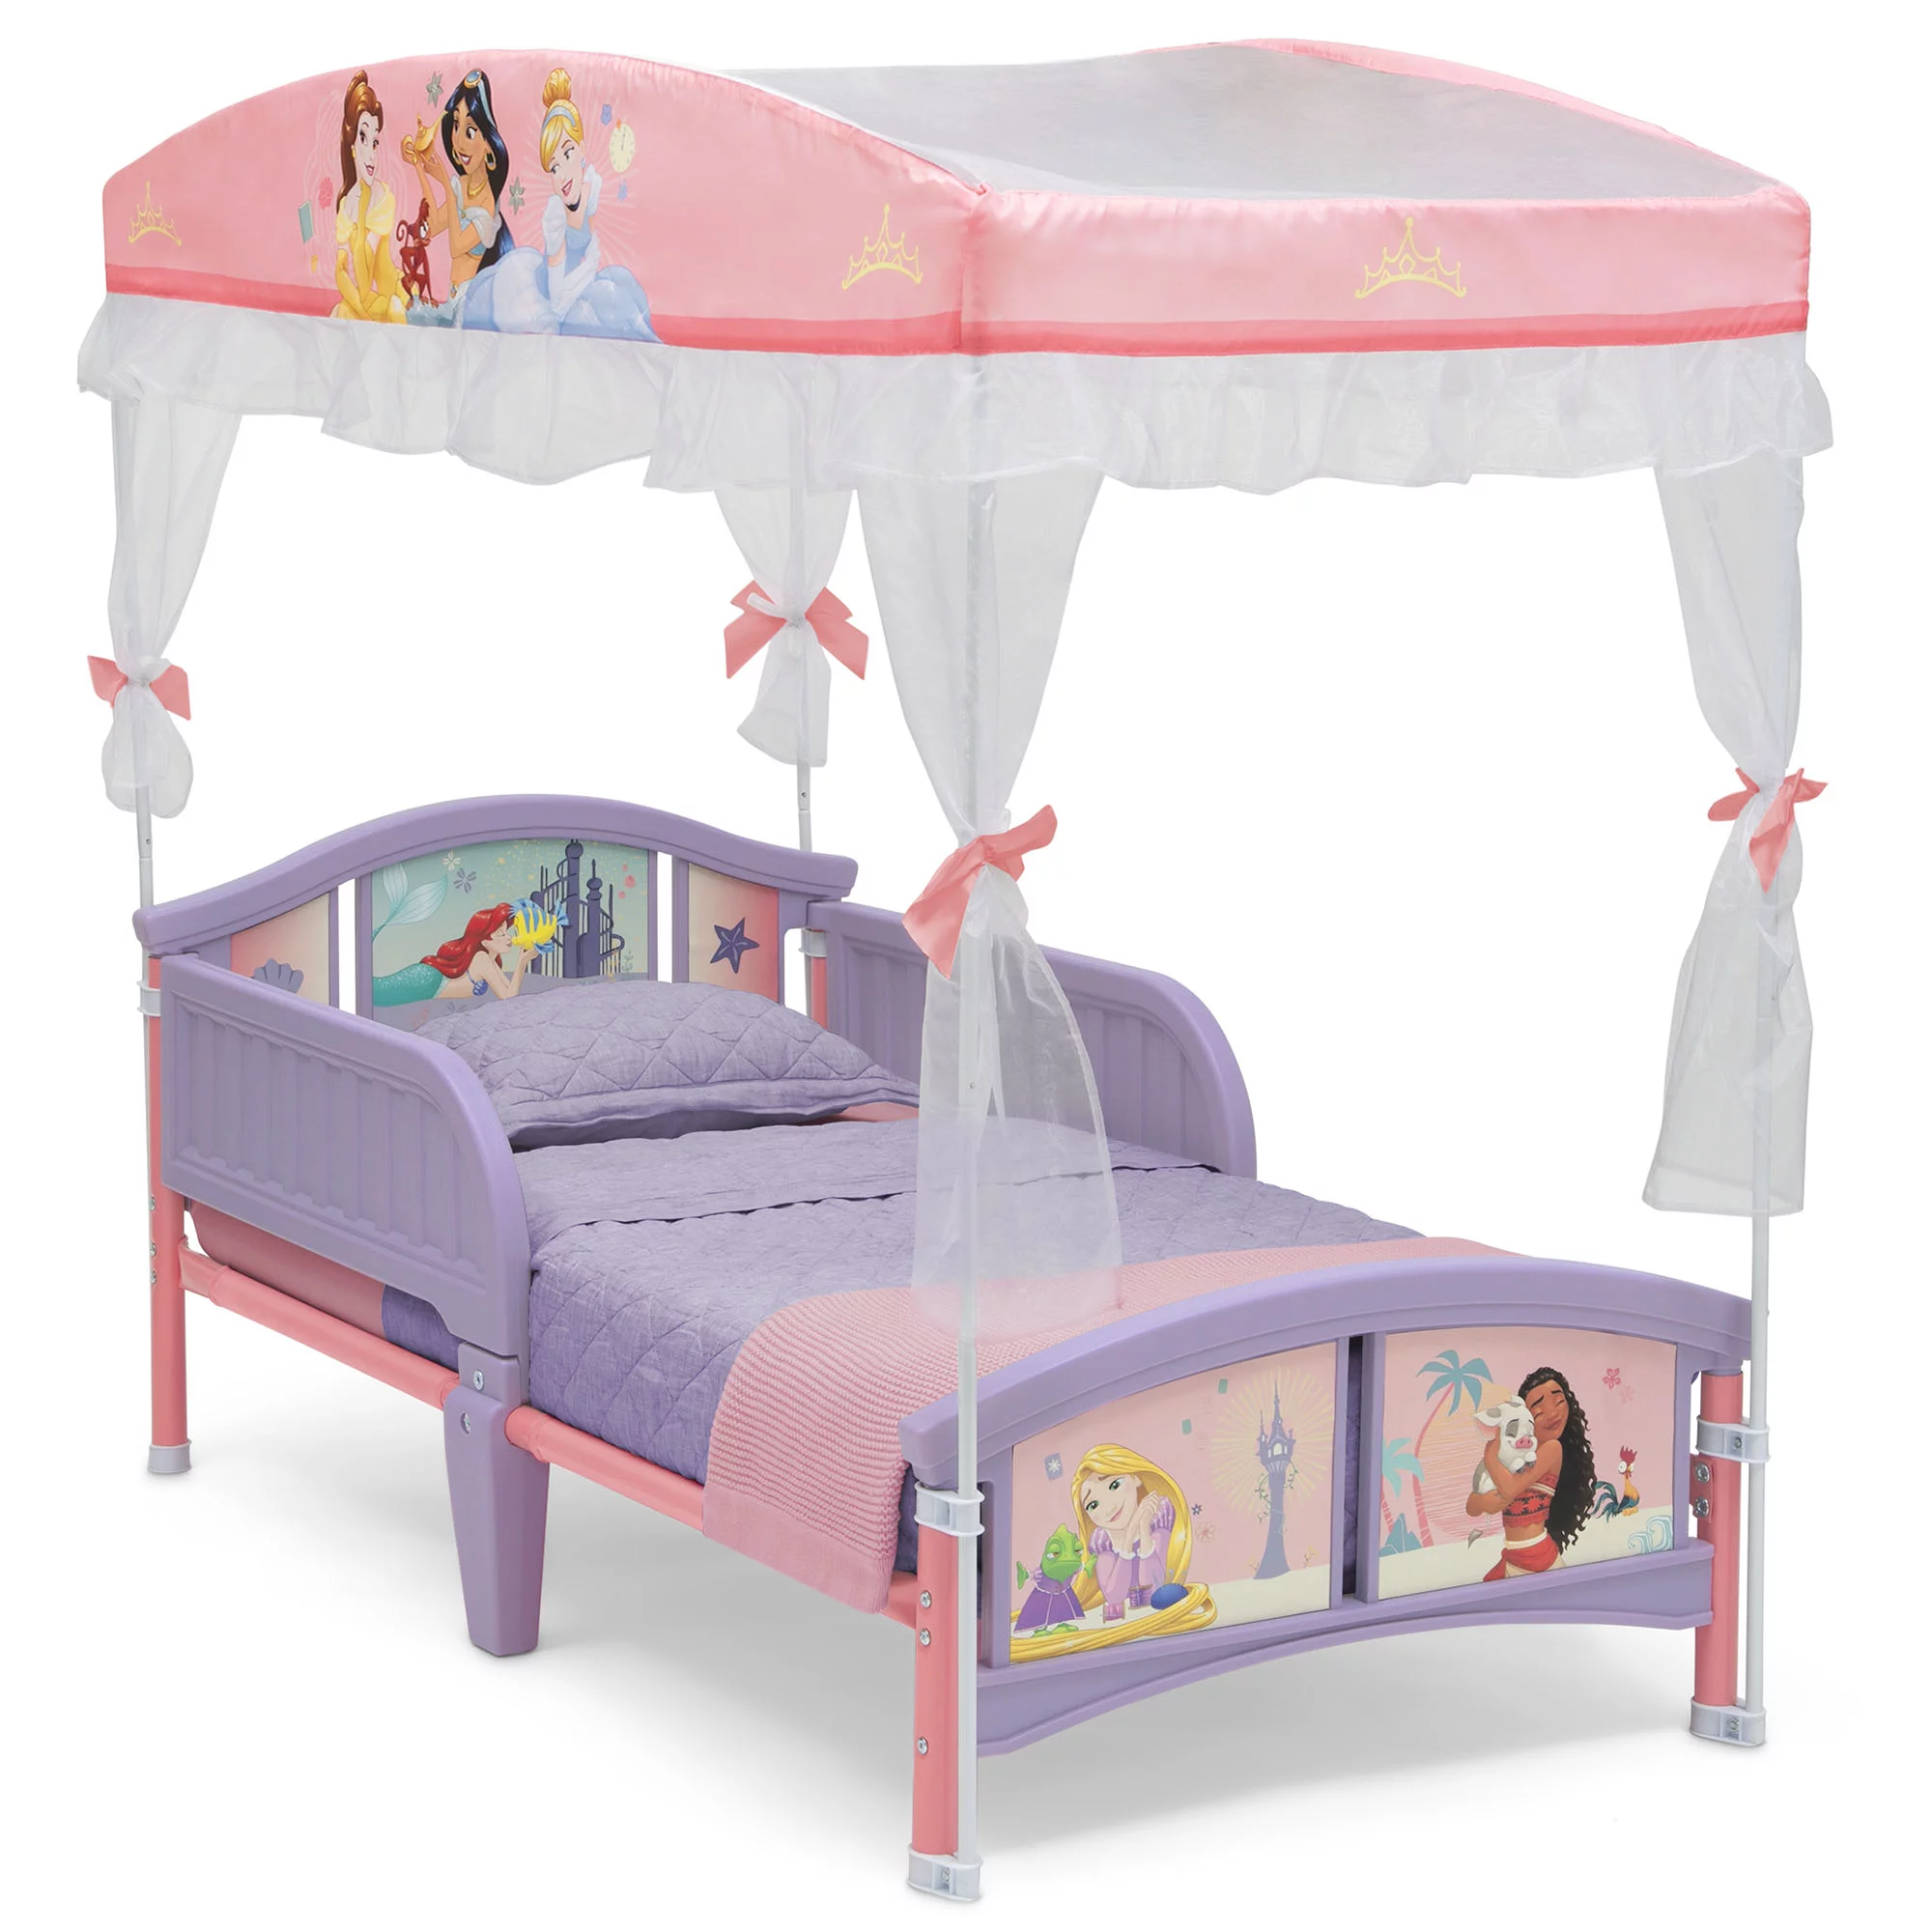 Disney Princess Plastic Toddler Bed with Canopy